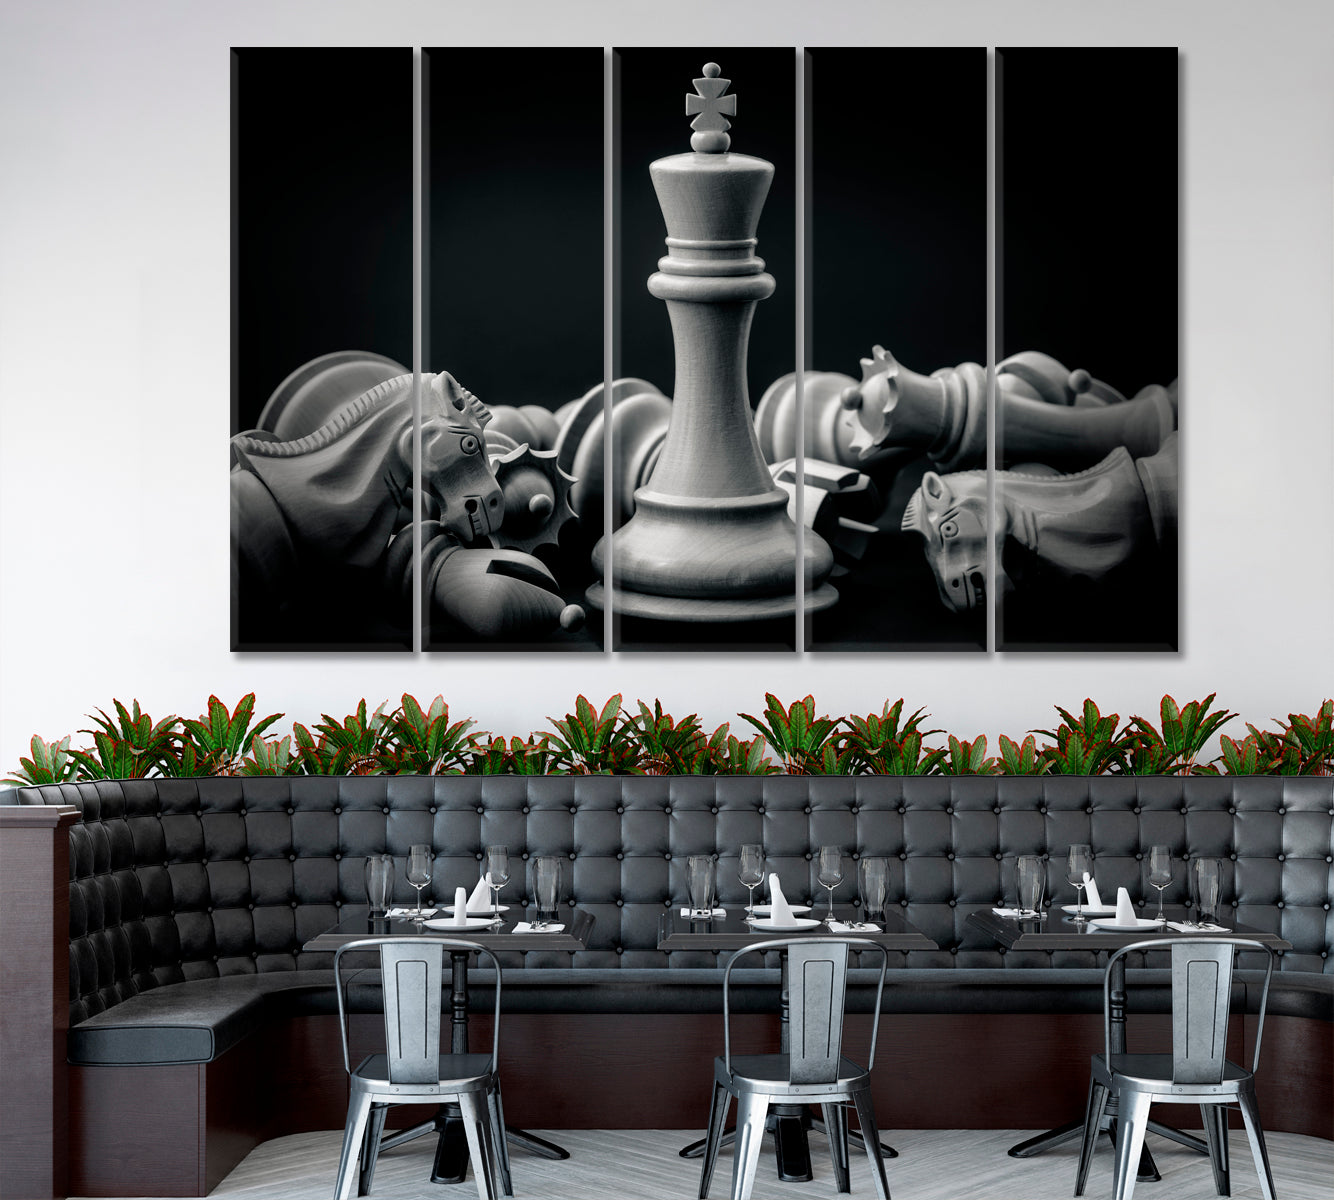 CHESS Black White King And Knight Leader Success Concept Poster Business Concept Wall Art Artesty 5 panels 36" x 24" 